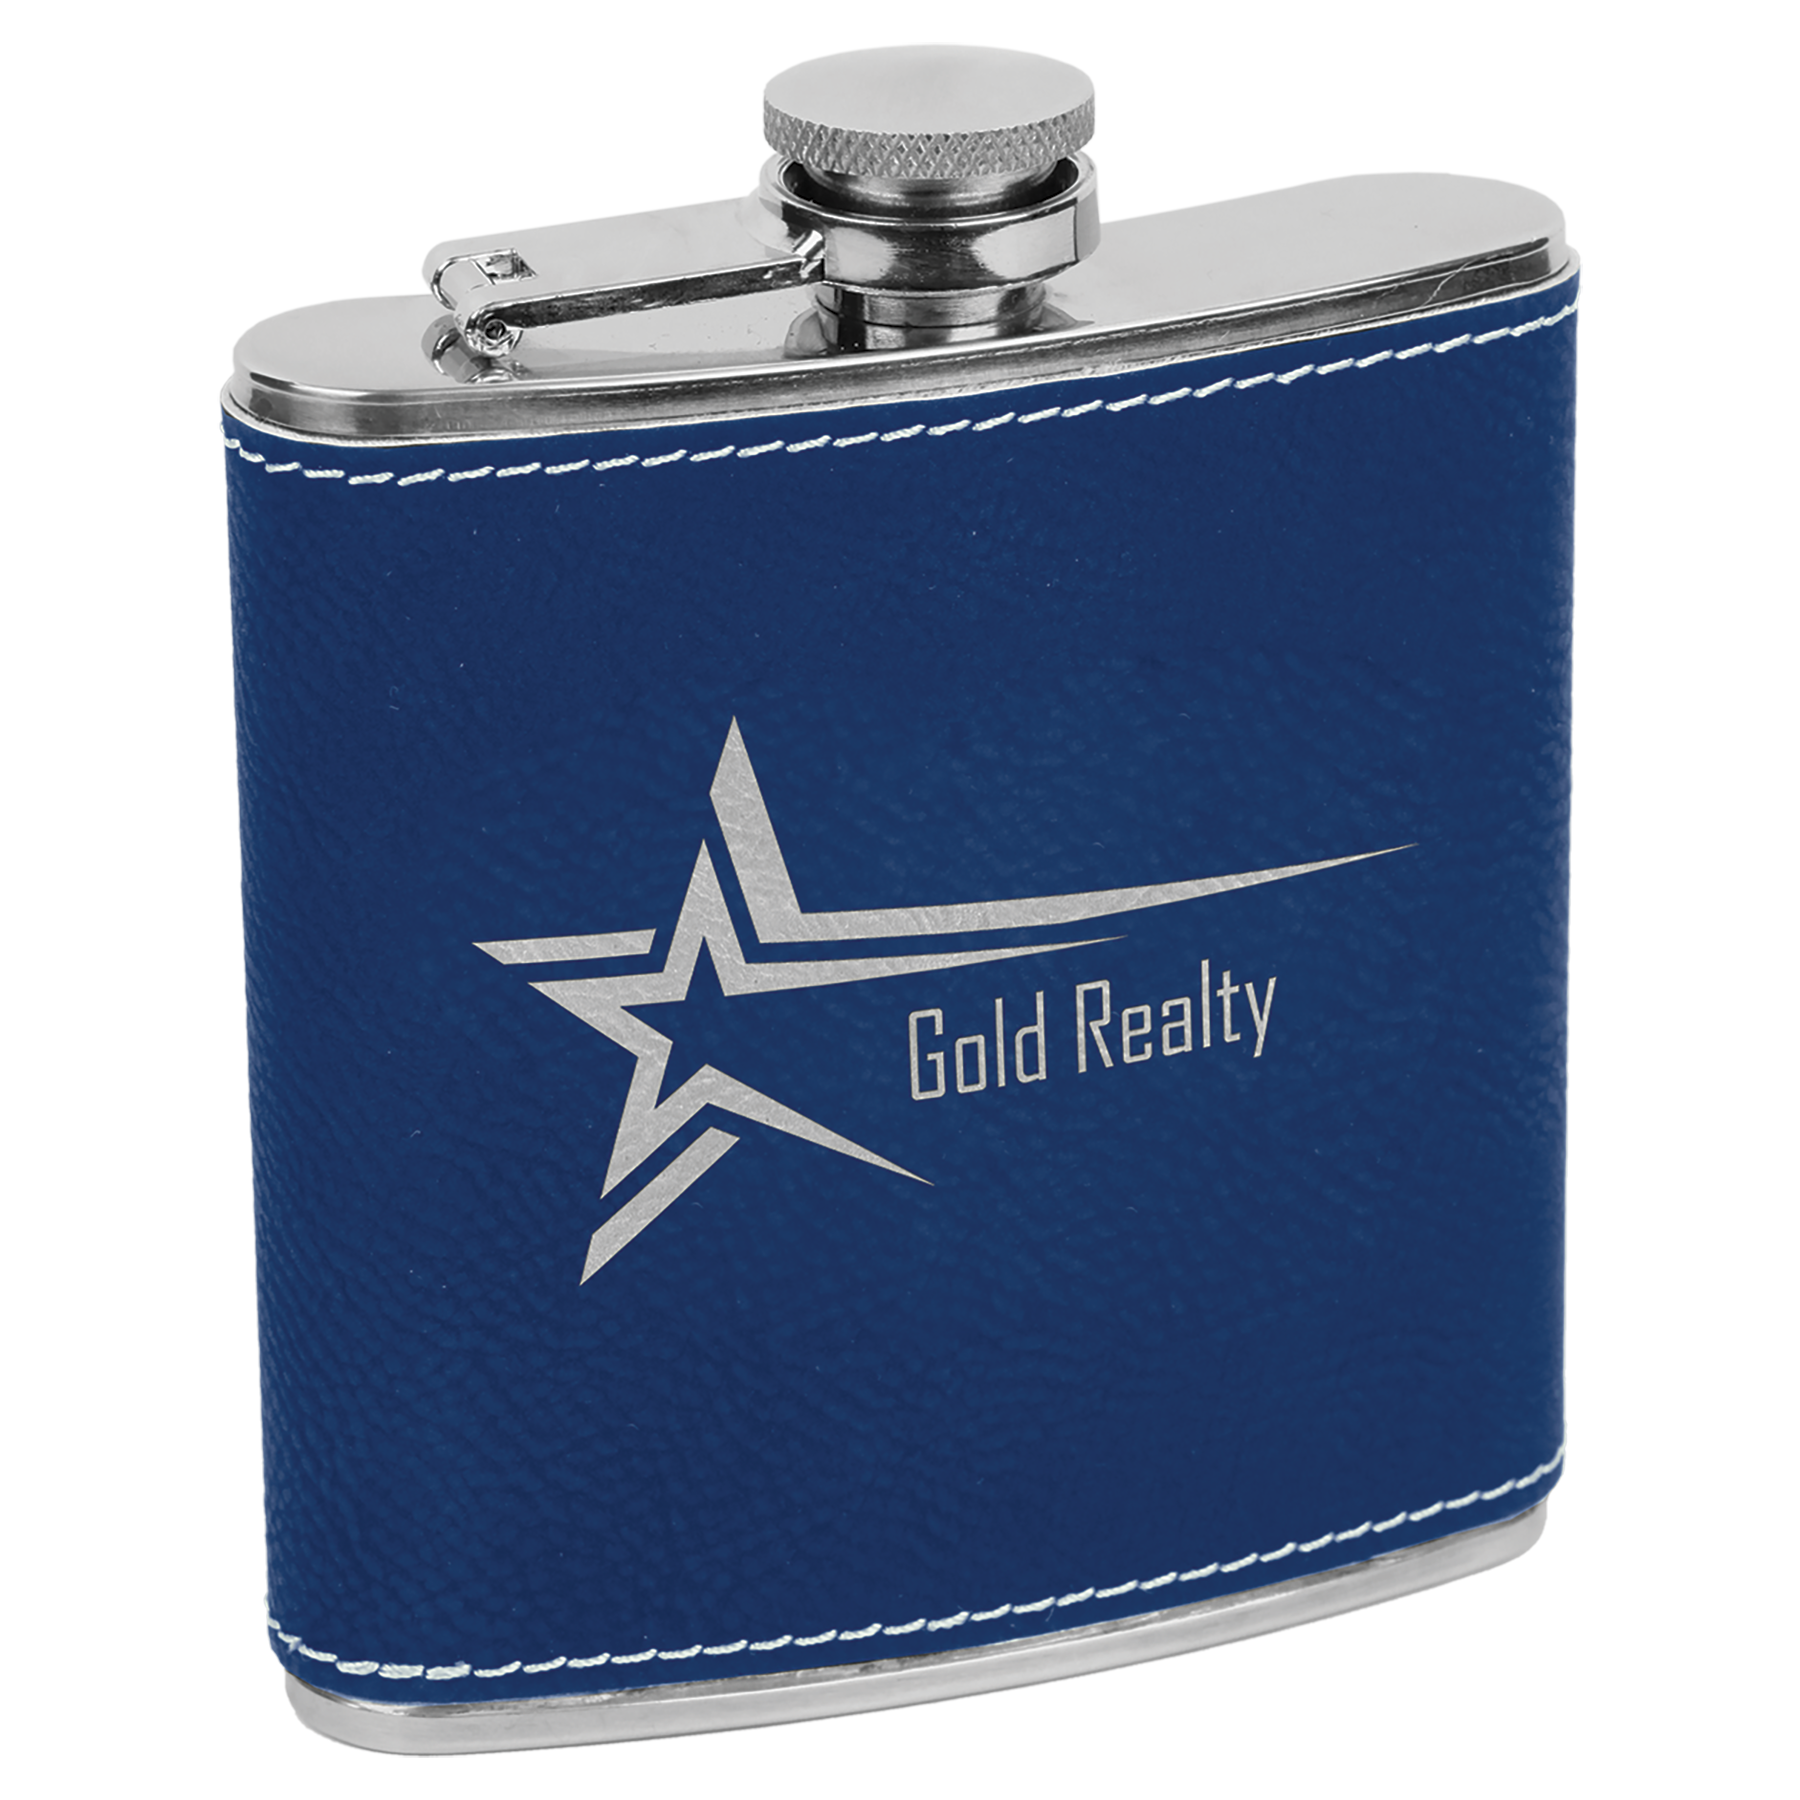 6 oz. Leatherette Stainless Steel Flask